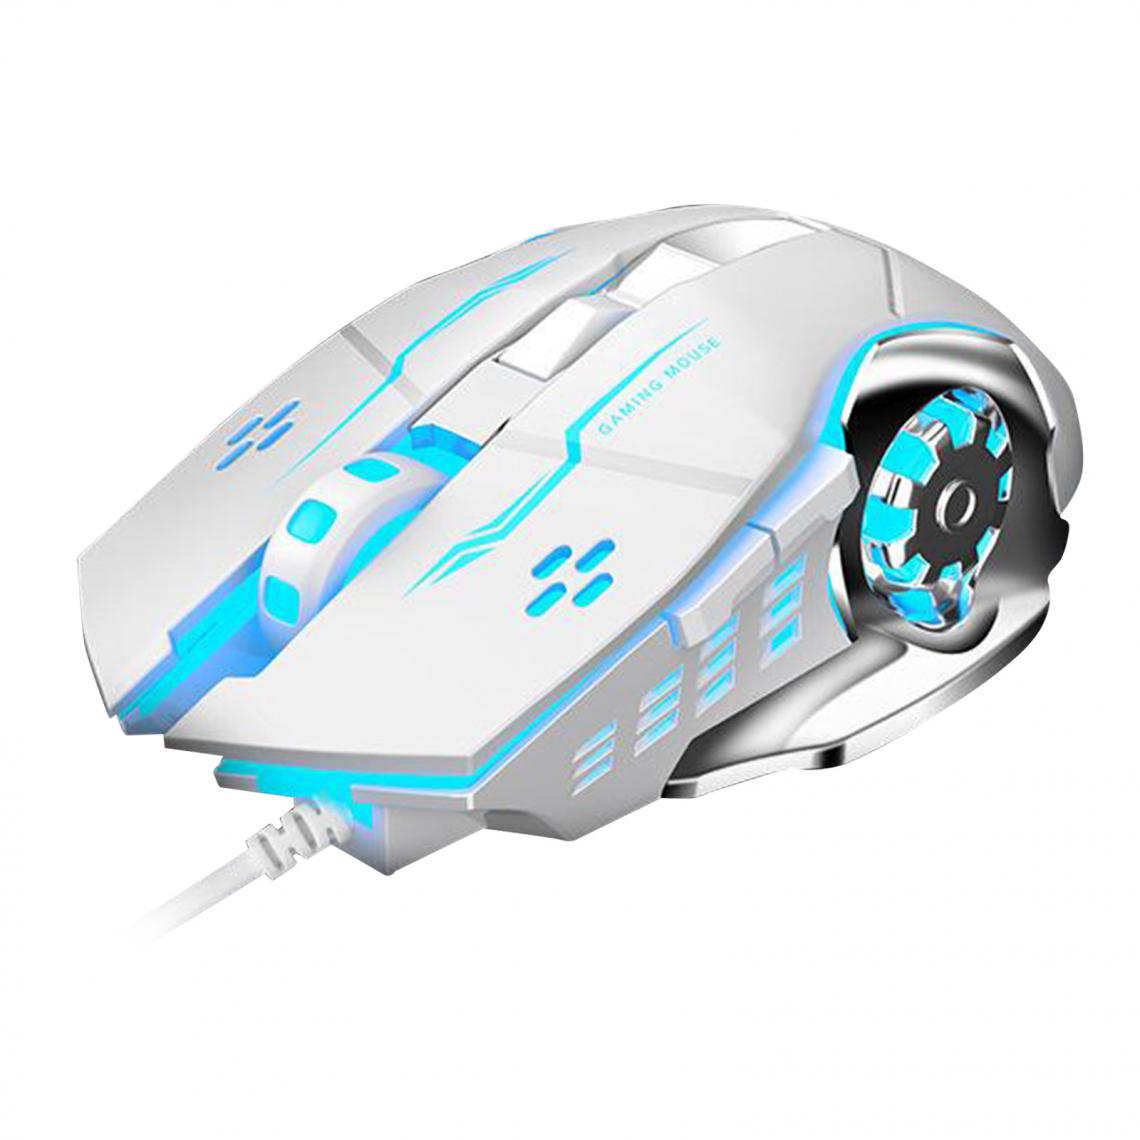 marque generique - S20 Gaming Mouse Wired Réglable 2400DPI Max Programmable PC Gaming Blanc - Pack Clavier Souris